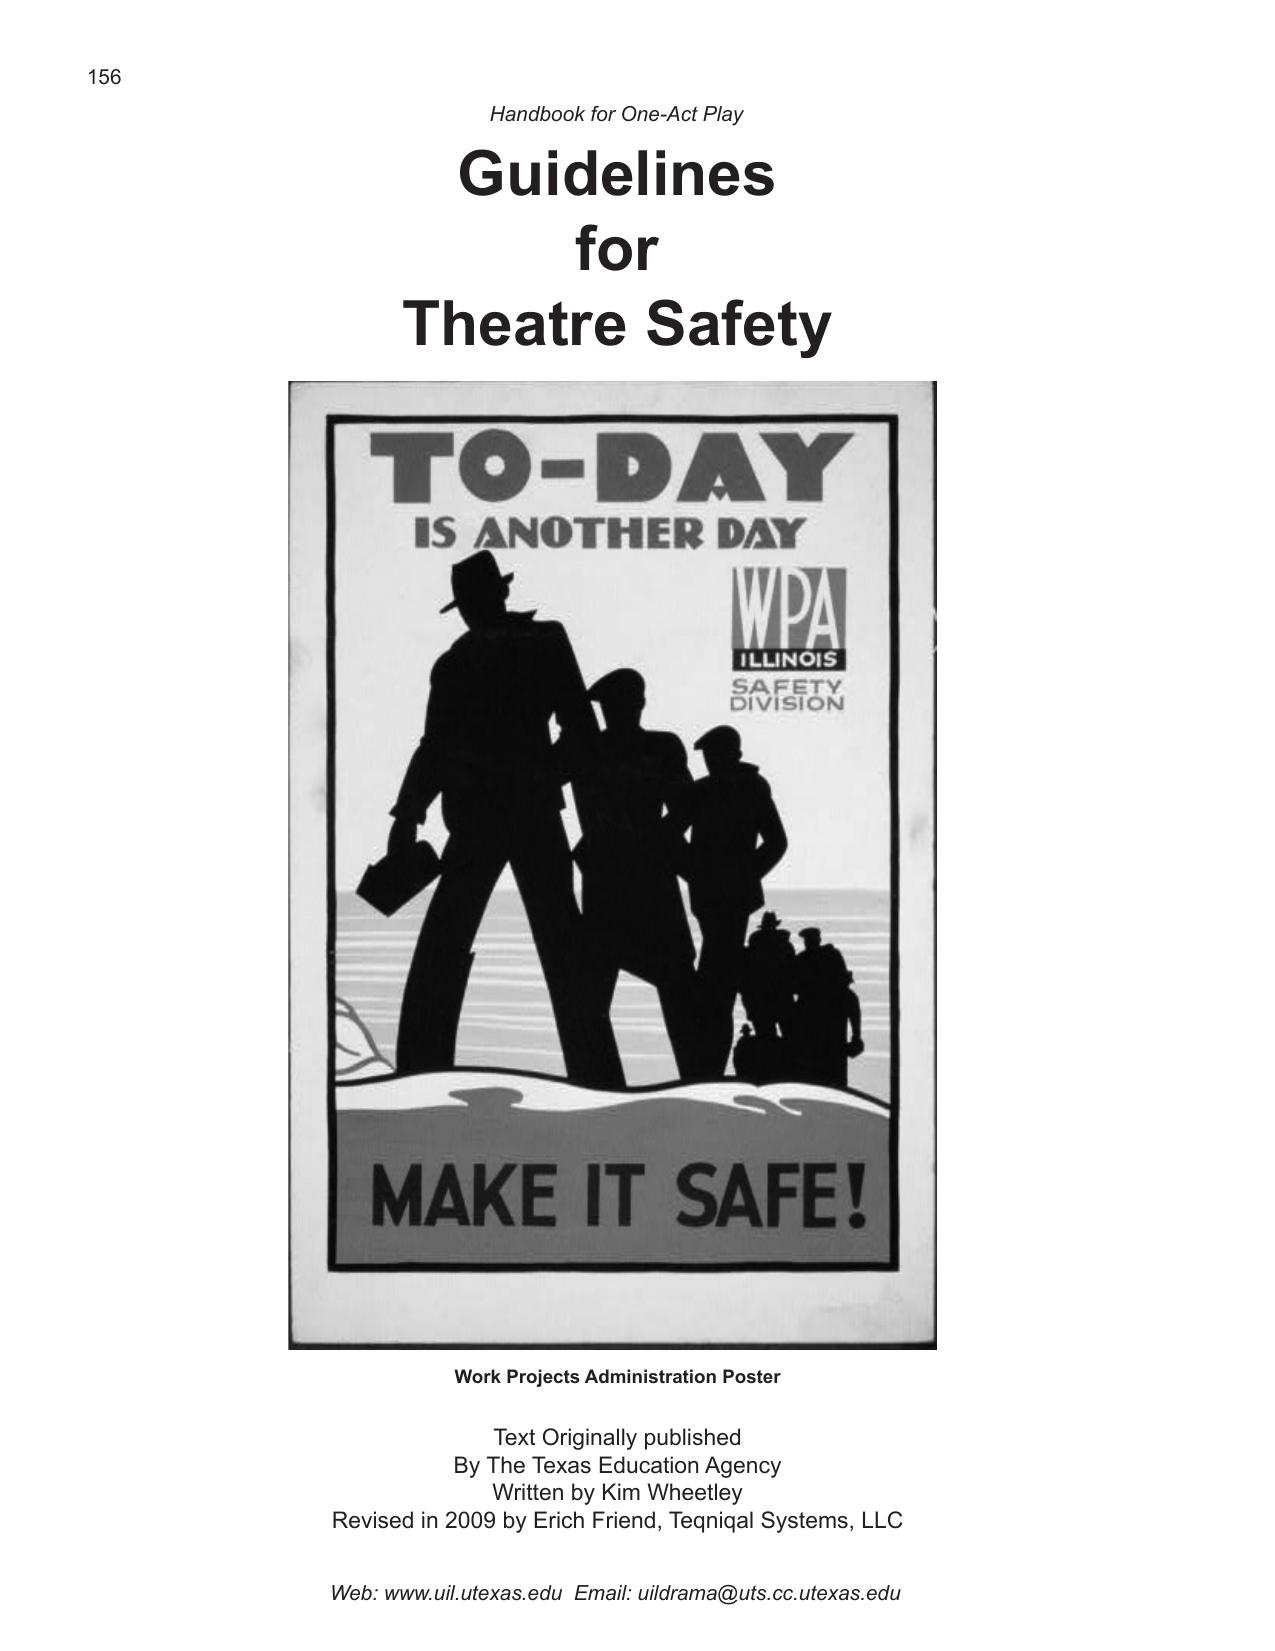 Guidelines for Theatre Safety 2009